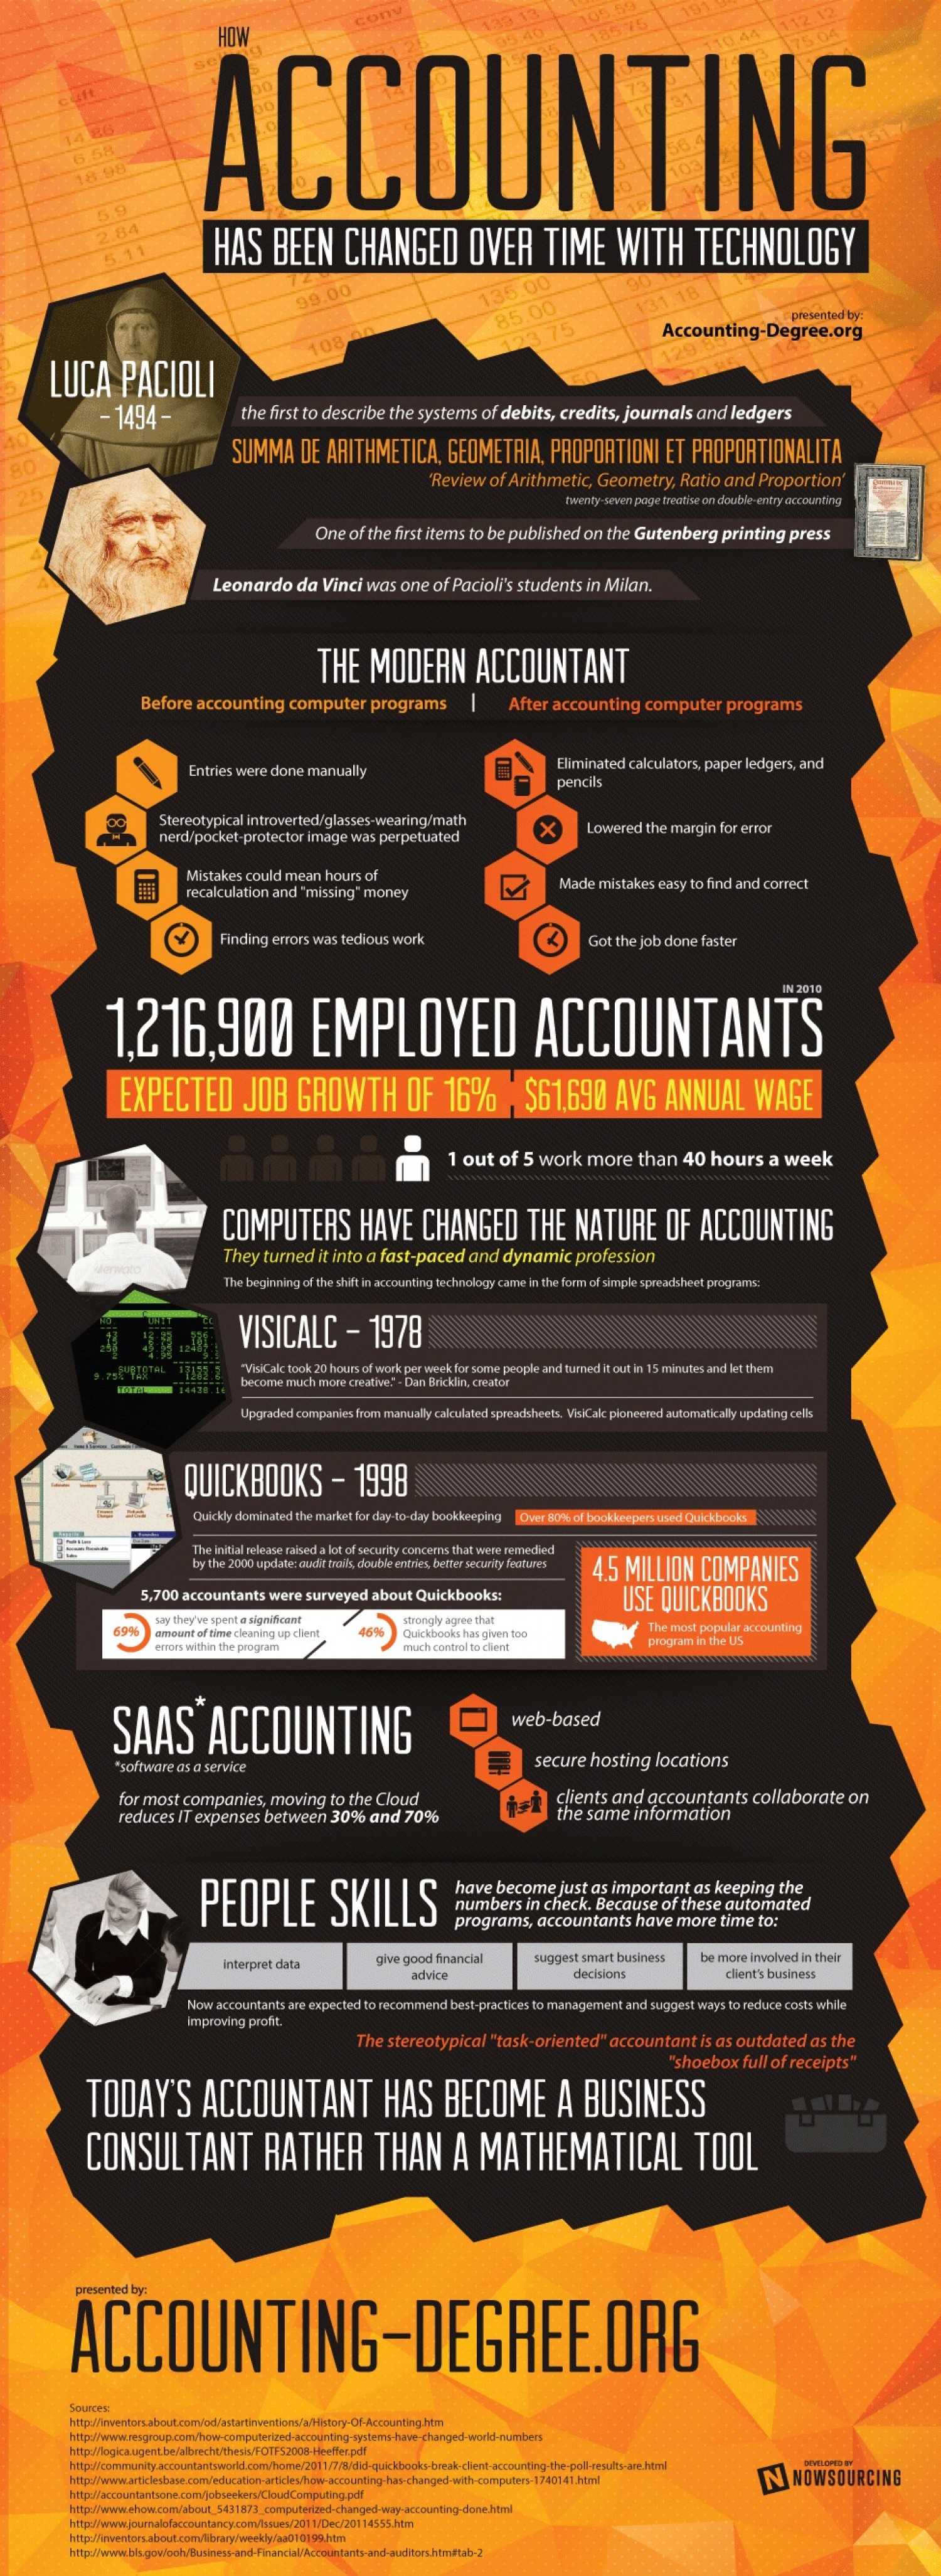 How Accounting Has Been Changed Over Time With Technology